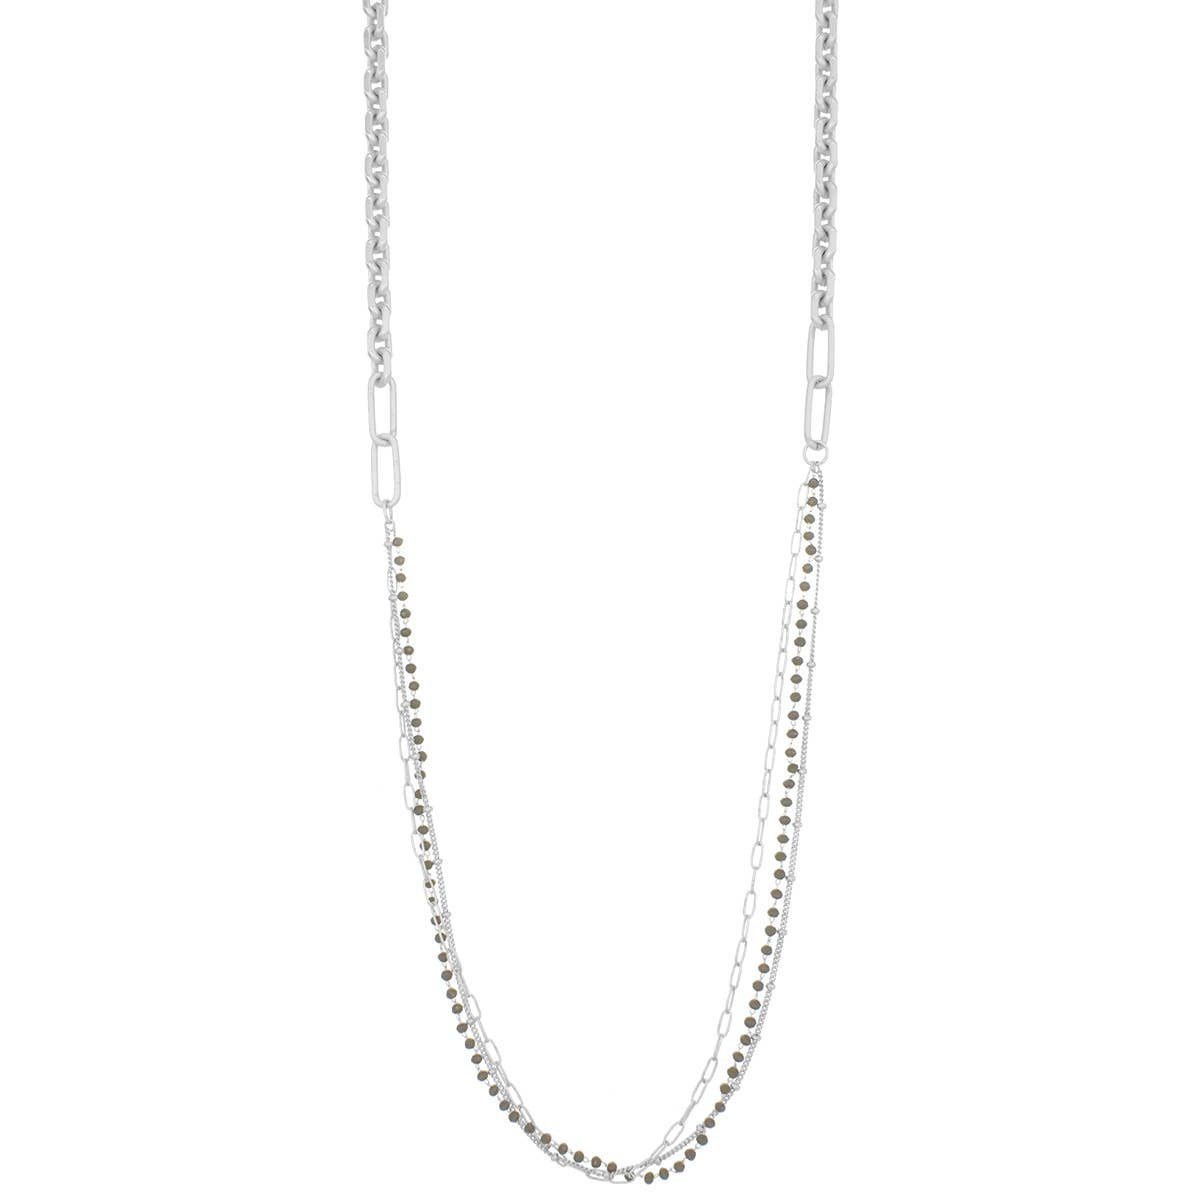 Metal Chain with Glass Bead Link Long Necklace